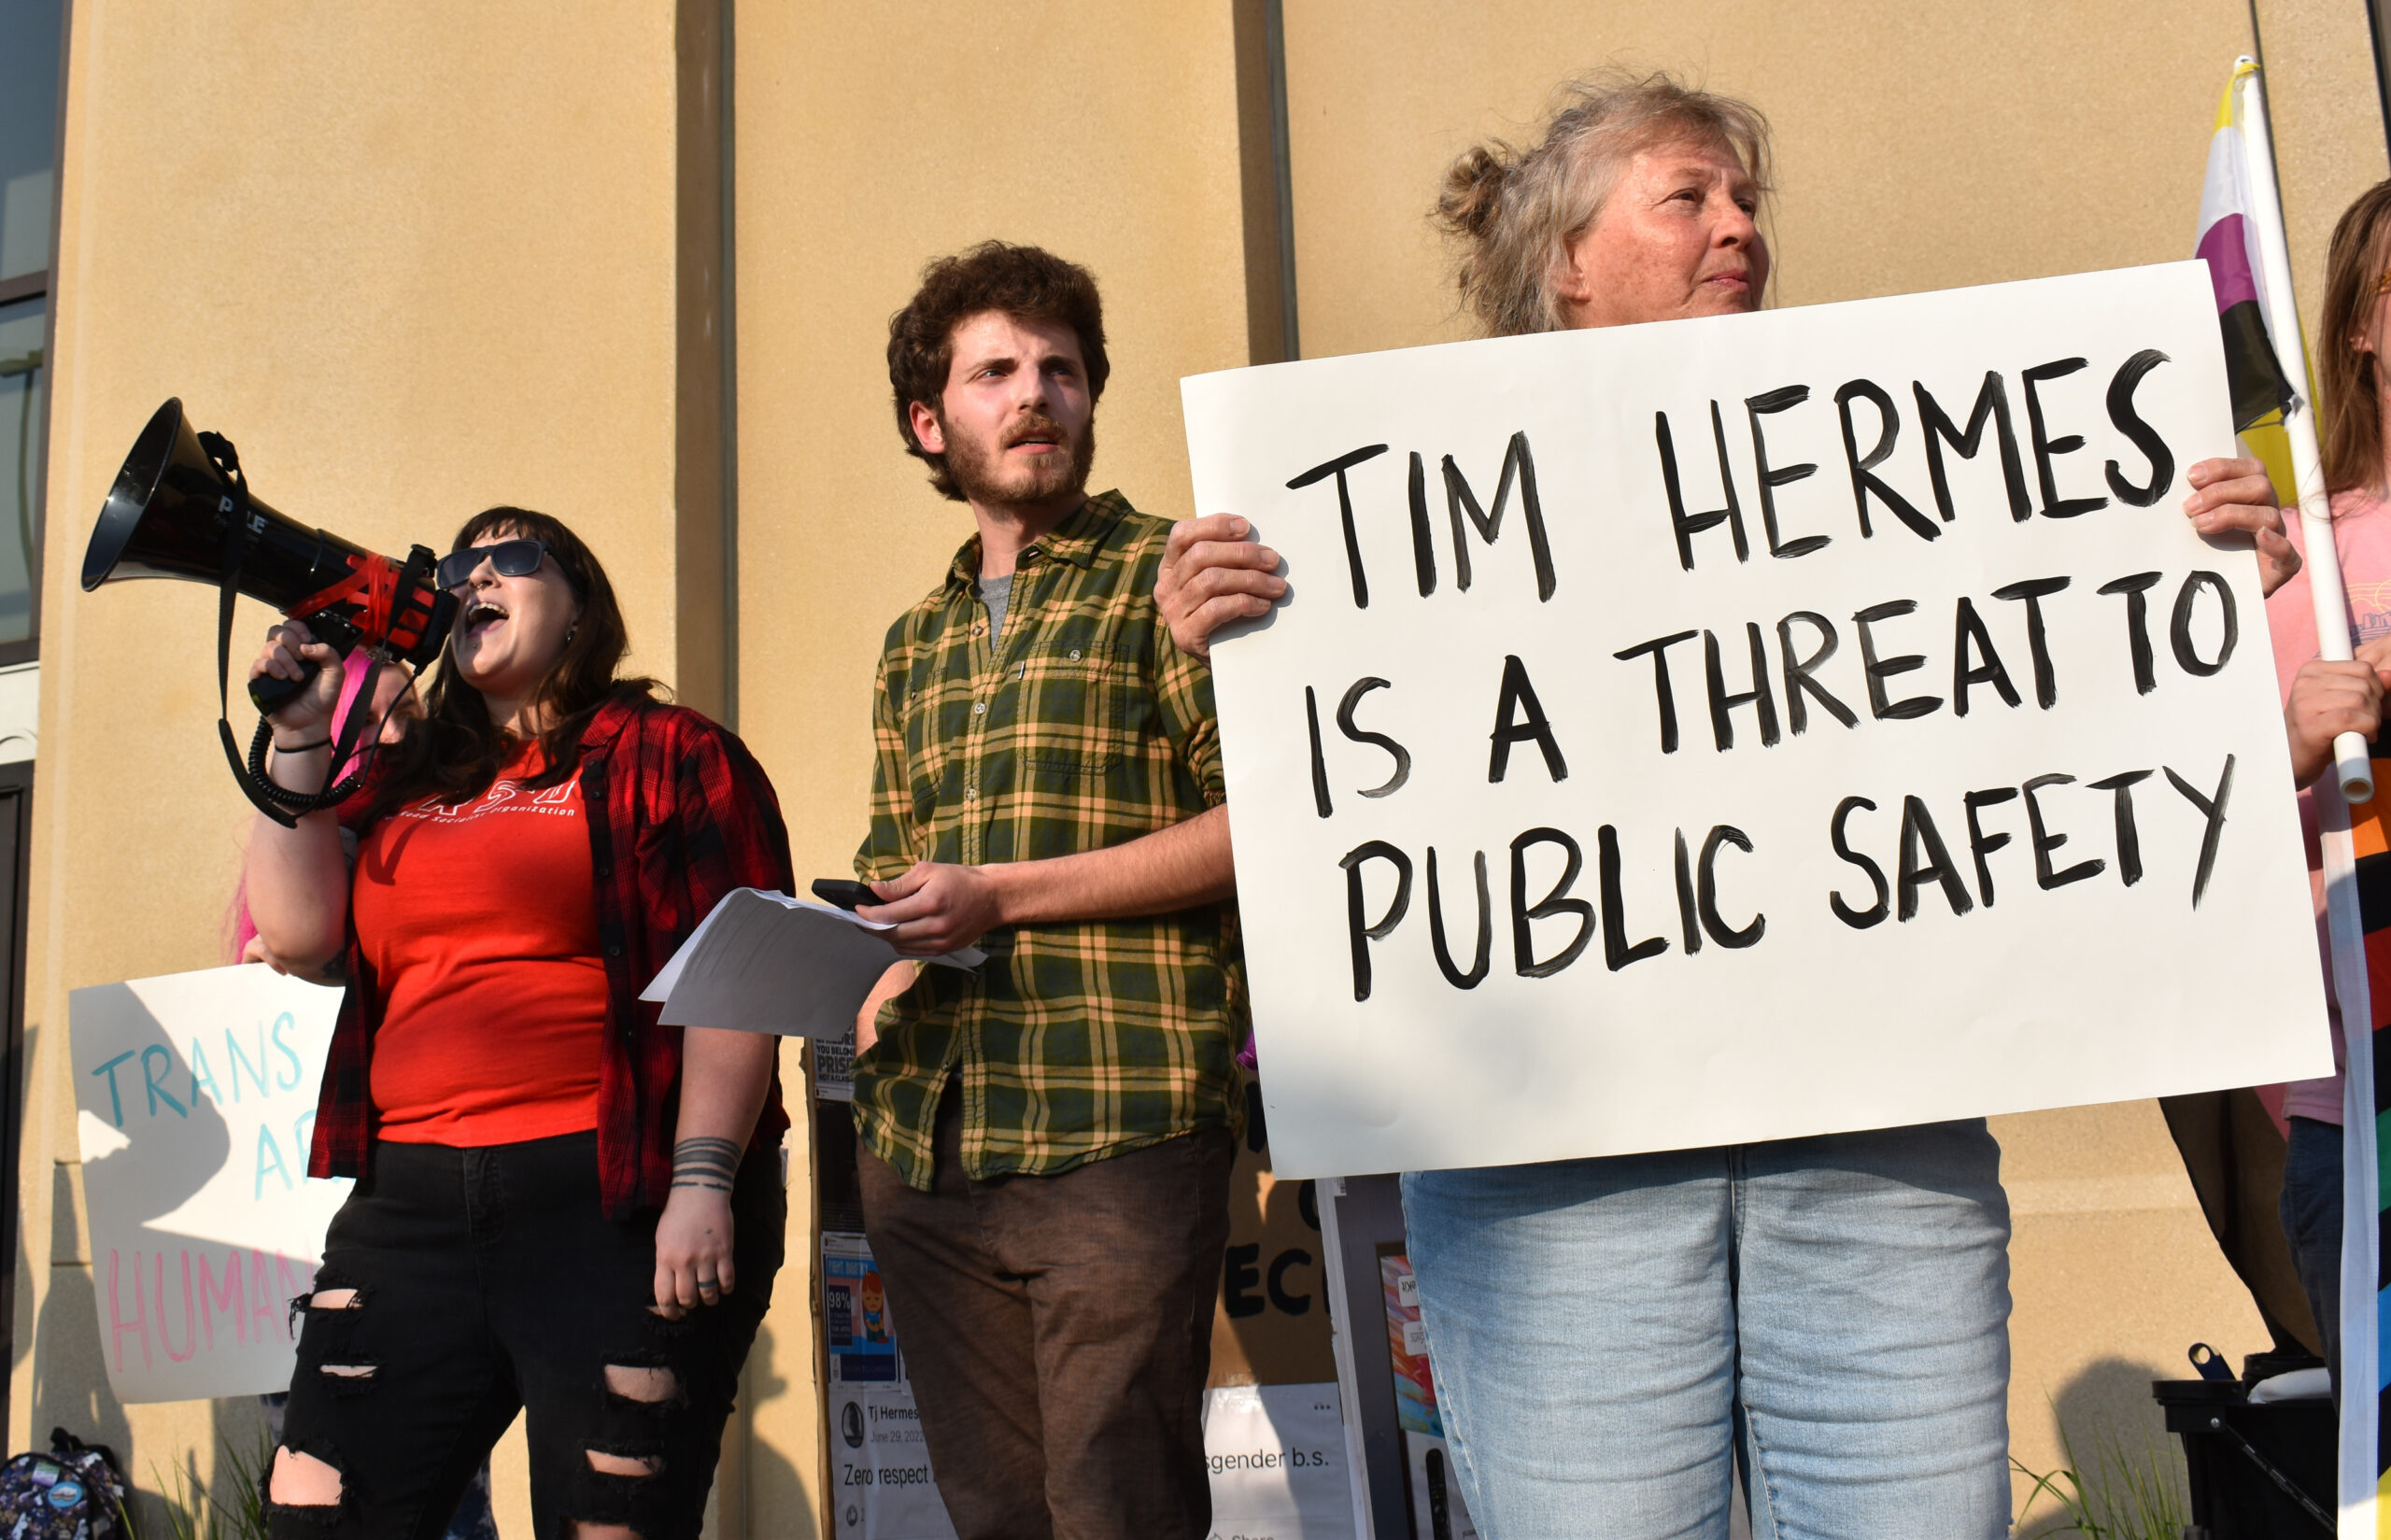 ‘He should resign’: Protests over transphobic comments by an Outagamie County Board member erupt into the meeting